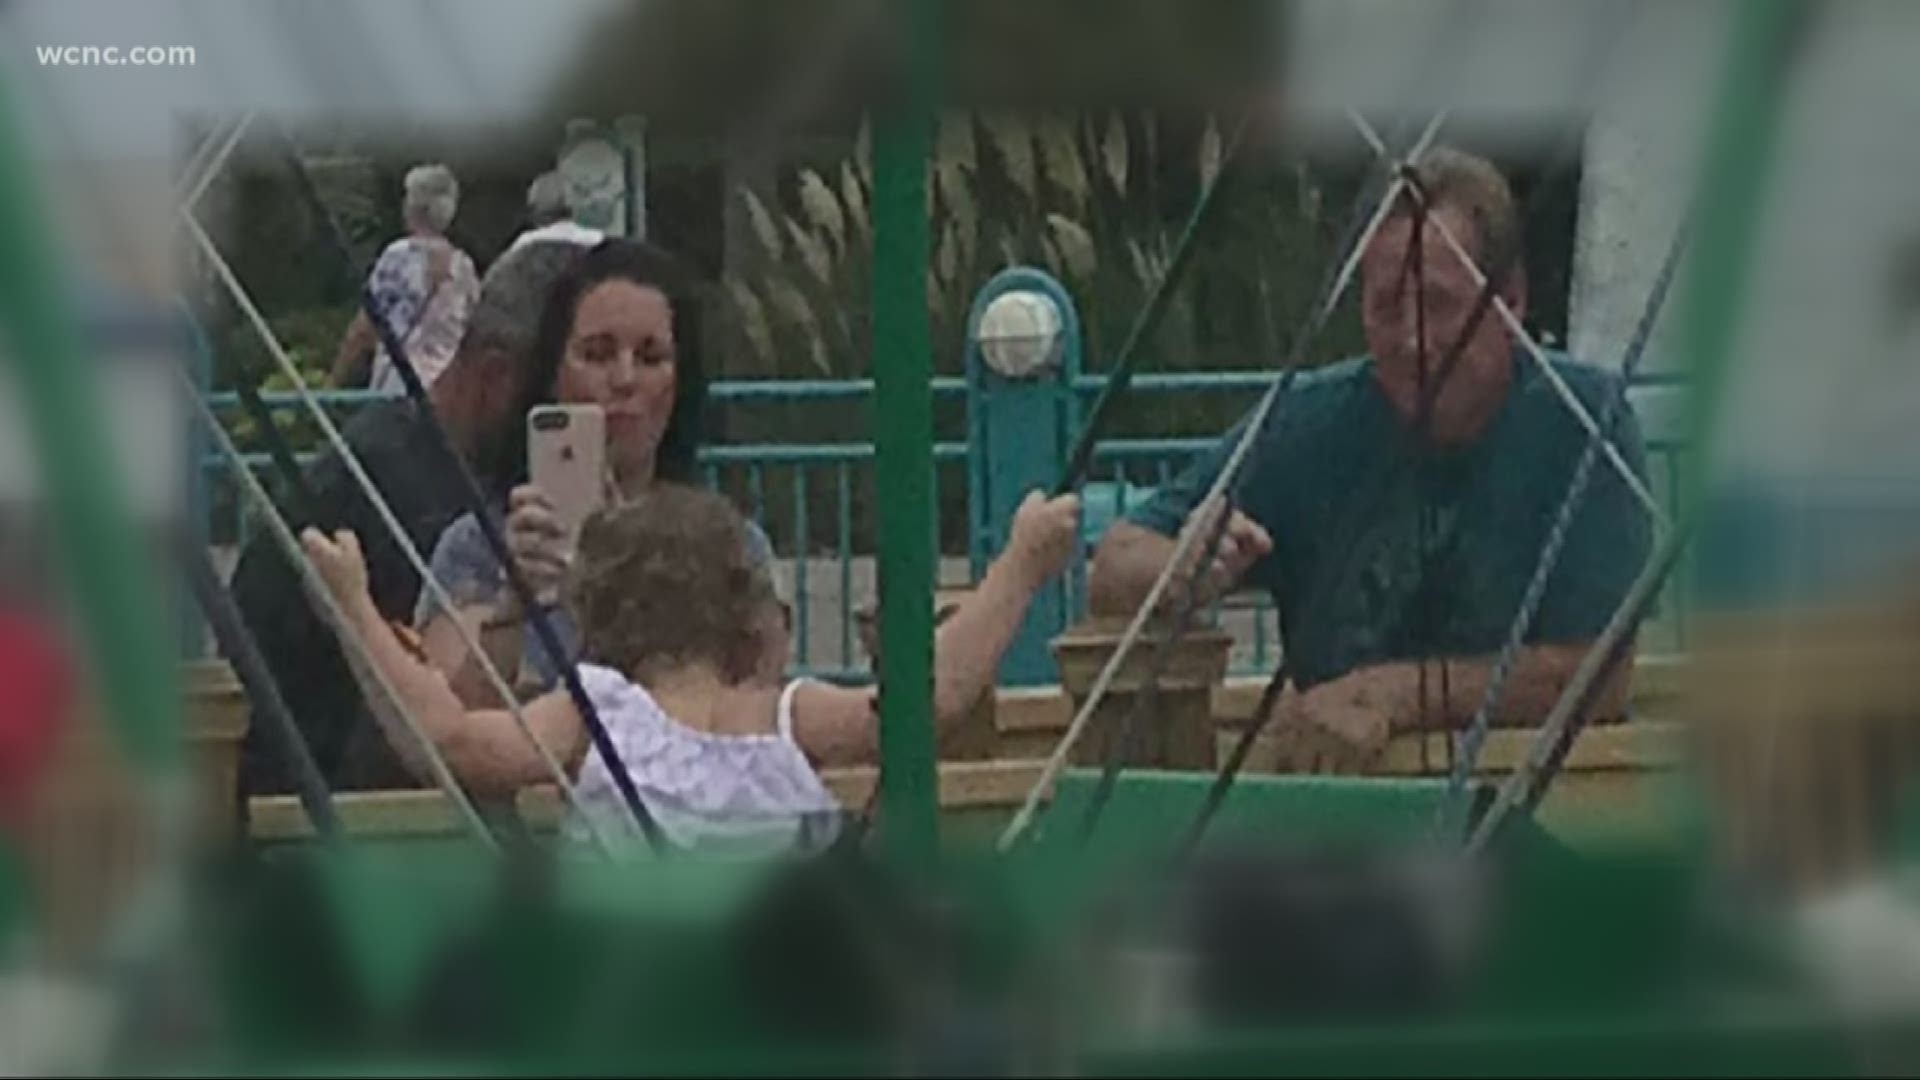 )- A North Carolina mother taking family vacation photos in Myrtle beach captured Shannan Watts and her two daughters days before they were murdered, allegedly by Shannan's husband and the girls' father Chris Watts, who is also visible in the photos.